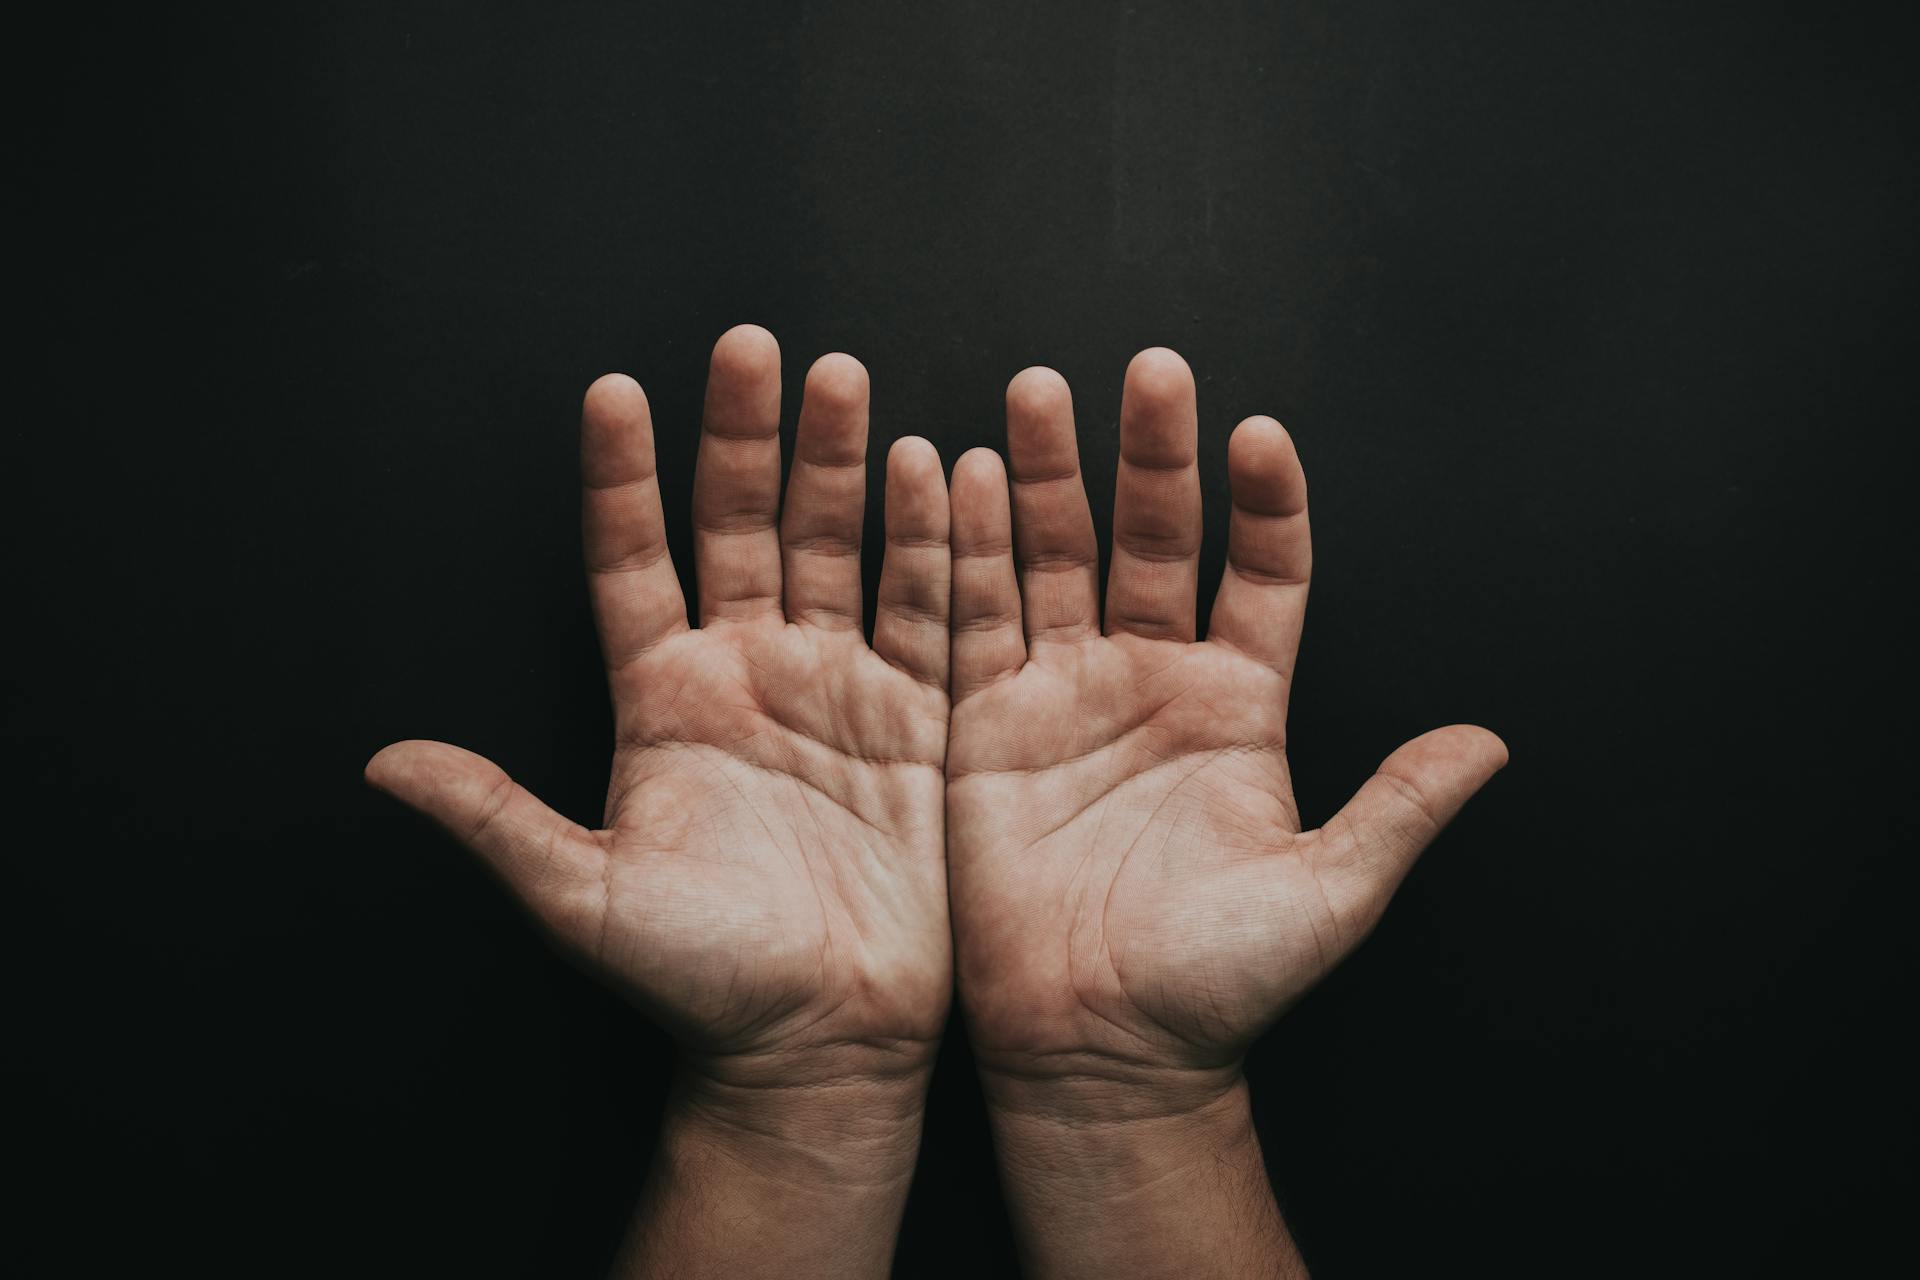 An image of open hands in a black or dark background.